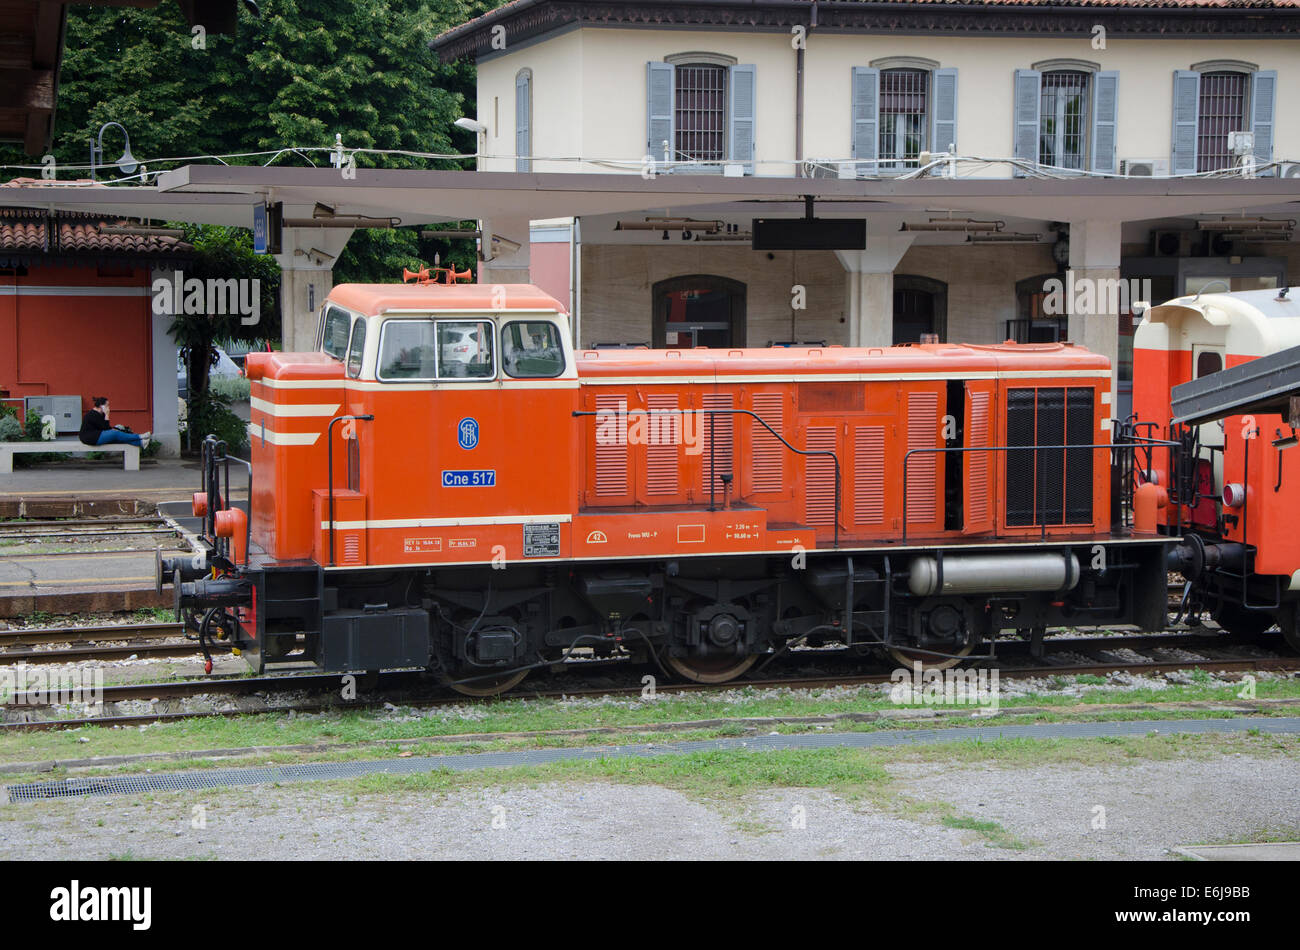 Train station of Iseo at Lake iseo, Lombardy, Italy. Stock Photo